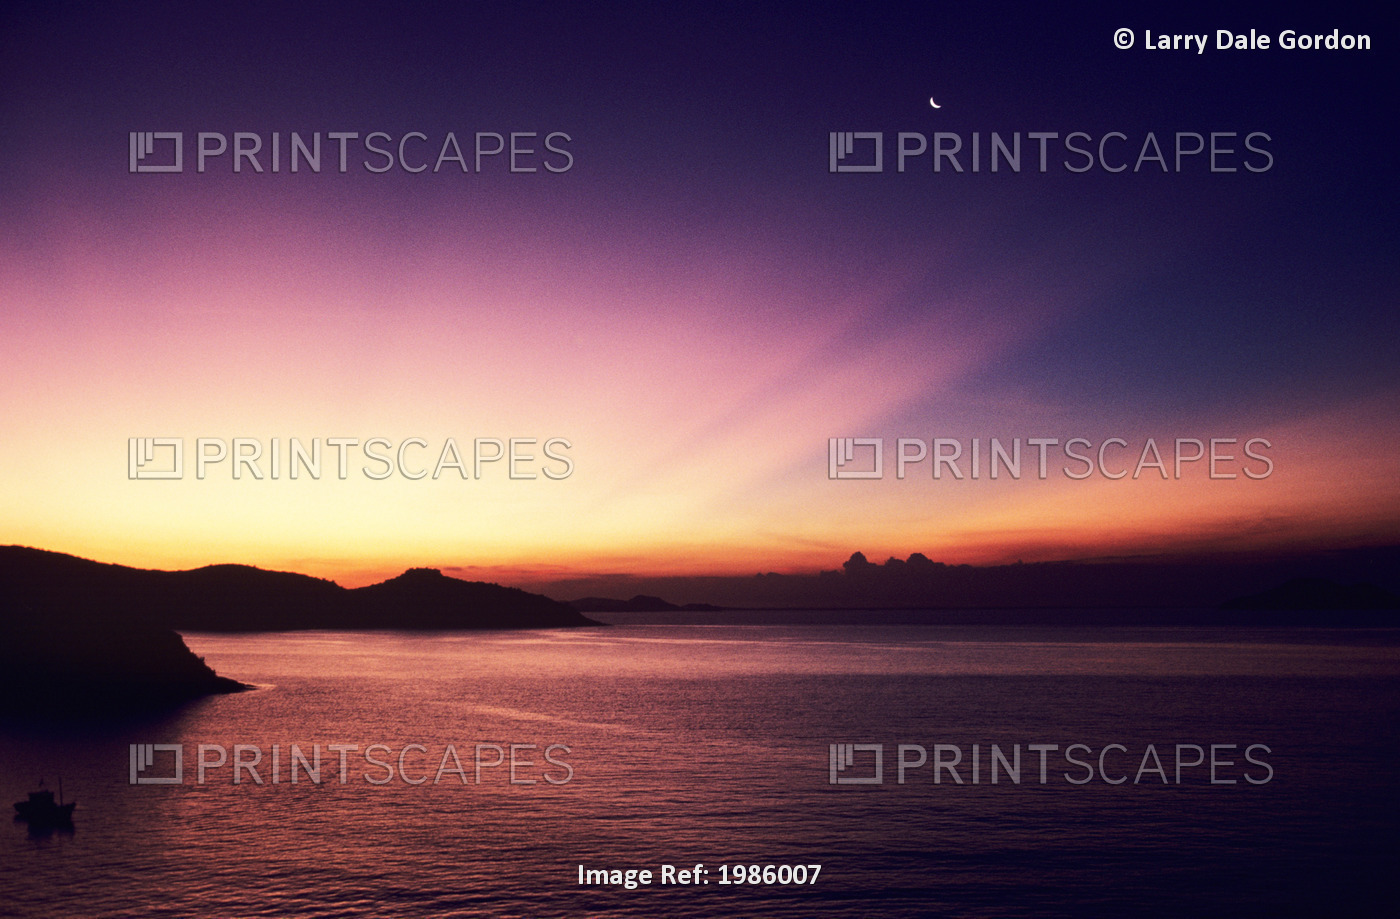 Mexico, Acapulco Bay, Colorful Sunset On Horizon, Crescent Moon In Sky.